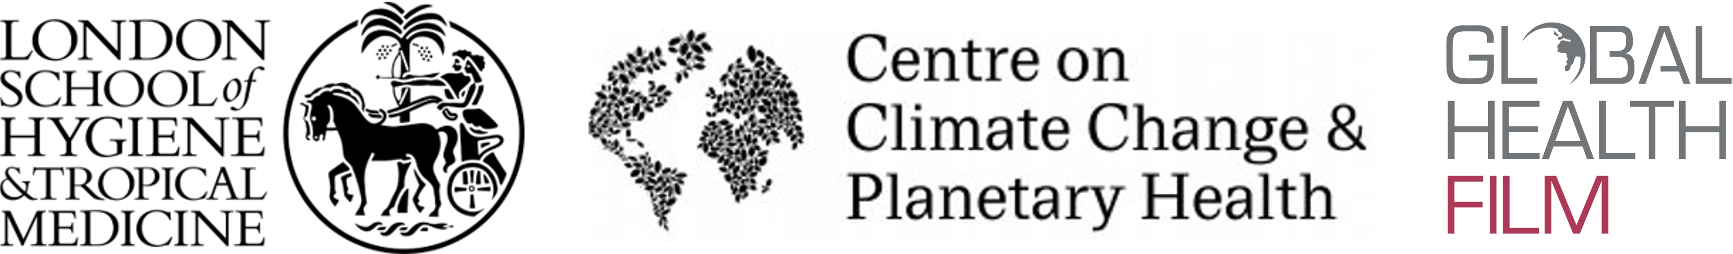 Logo of LSHTM Centre on Climate Change & Planetary Health and Global Health Film